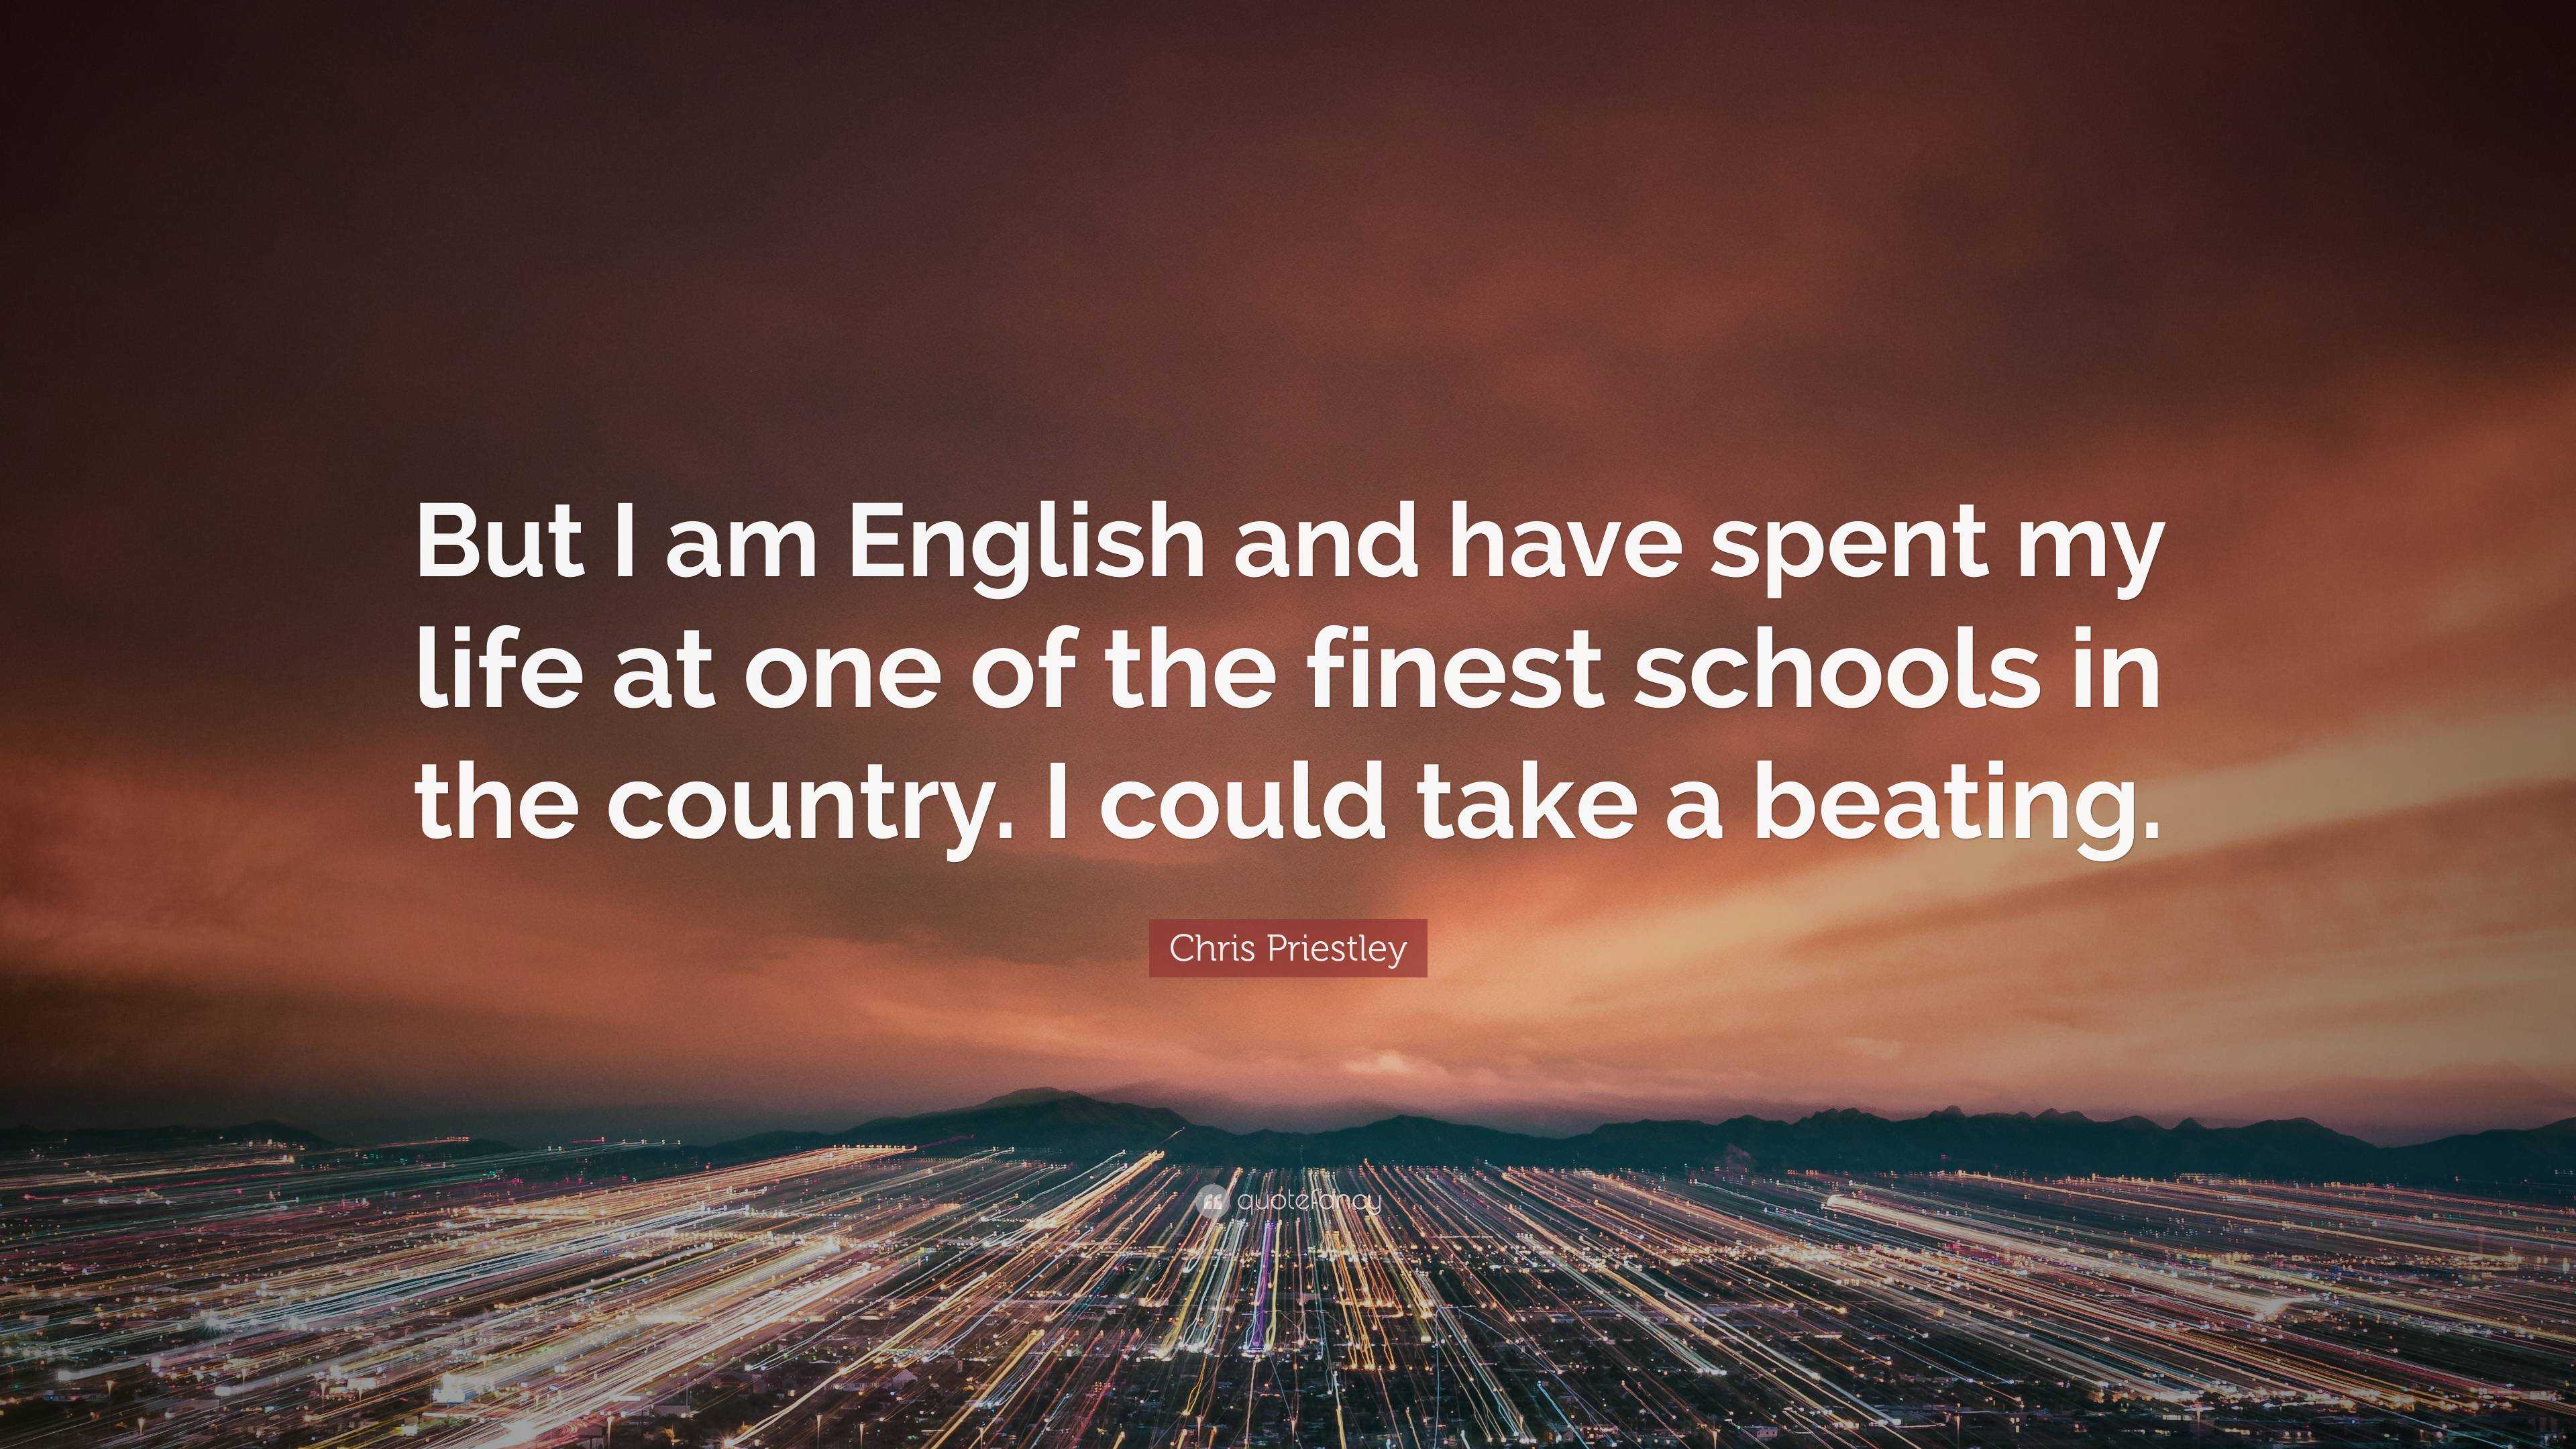 Chris Priestley Quote: “But I am English and have spent my life at one of  the